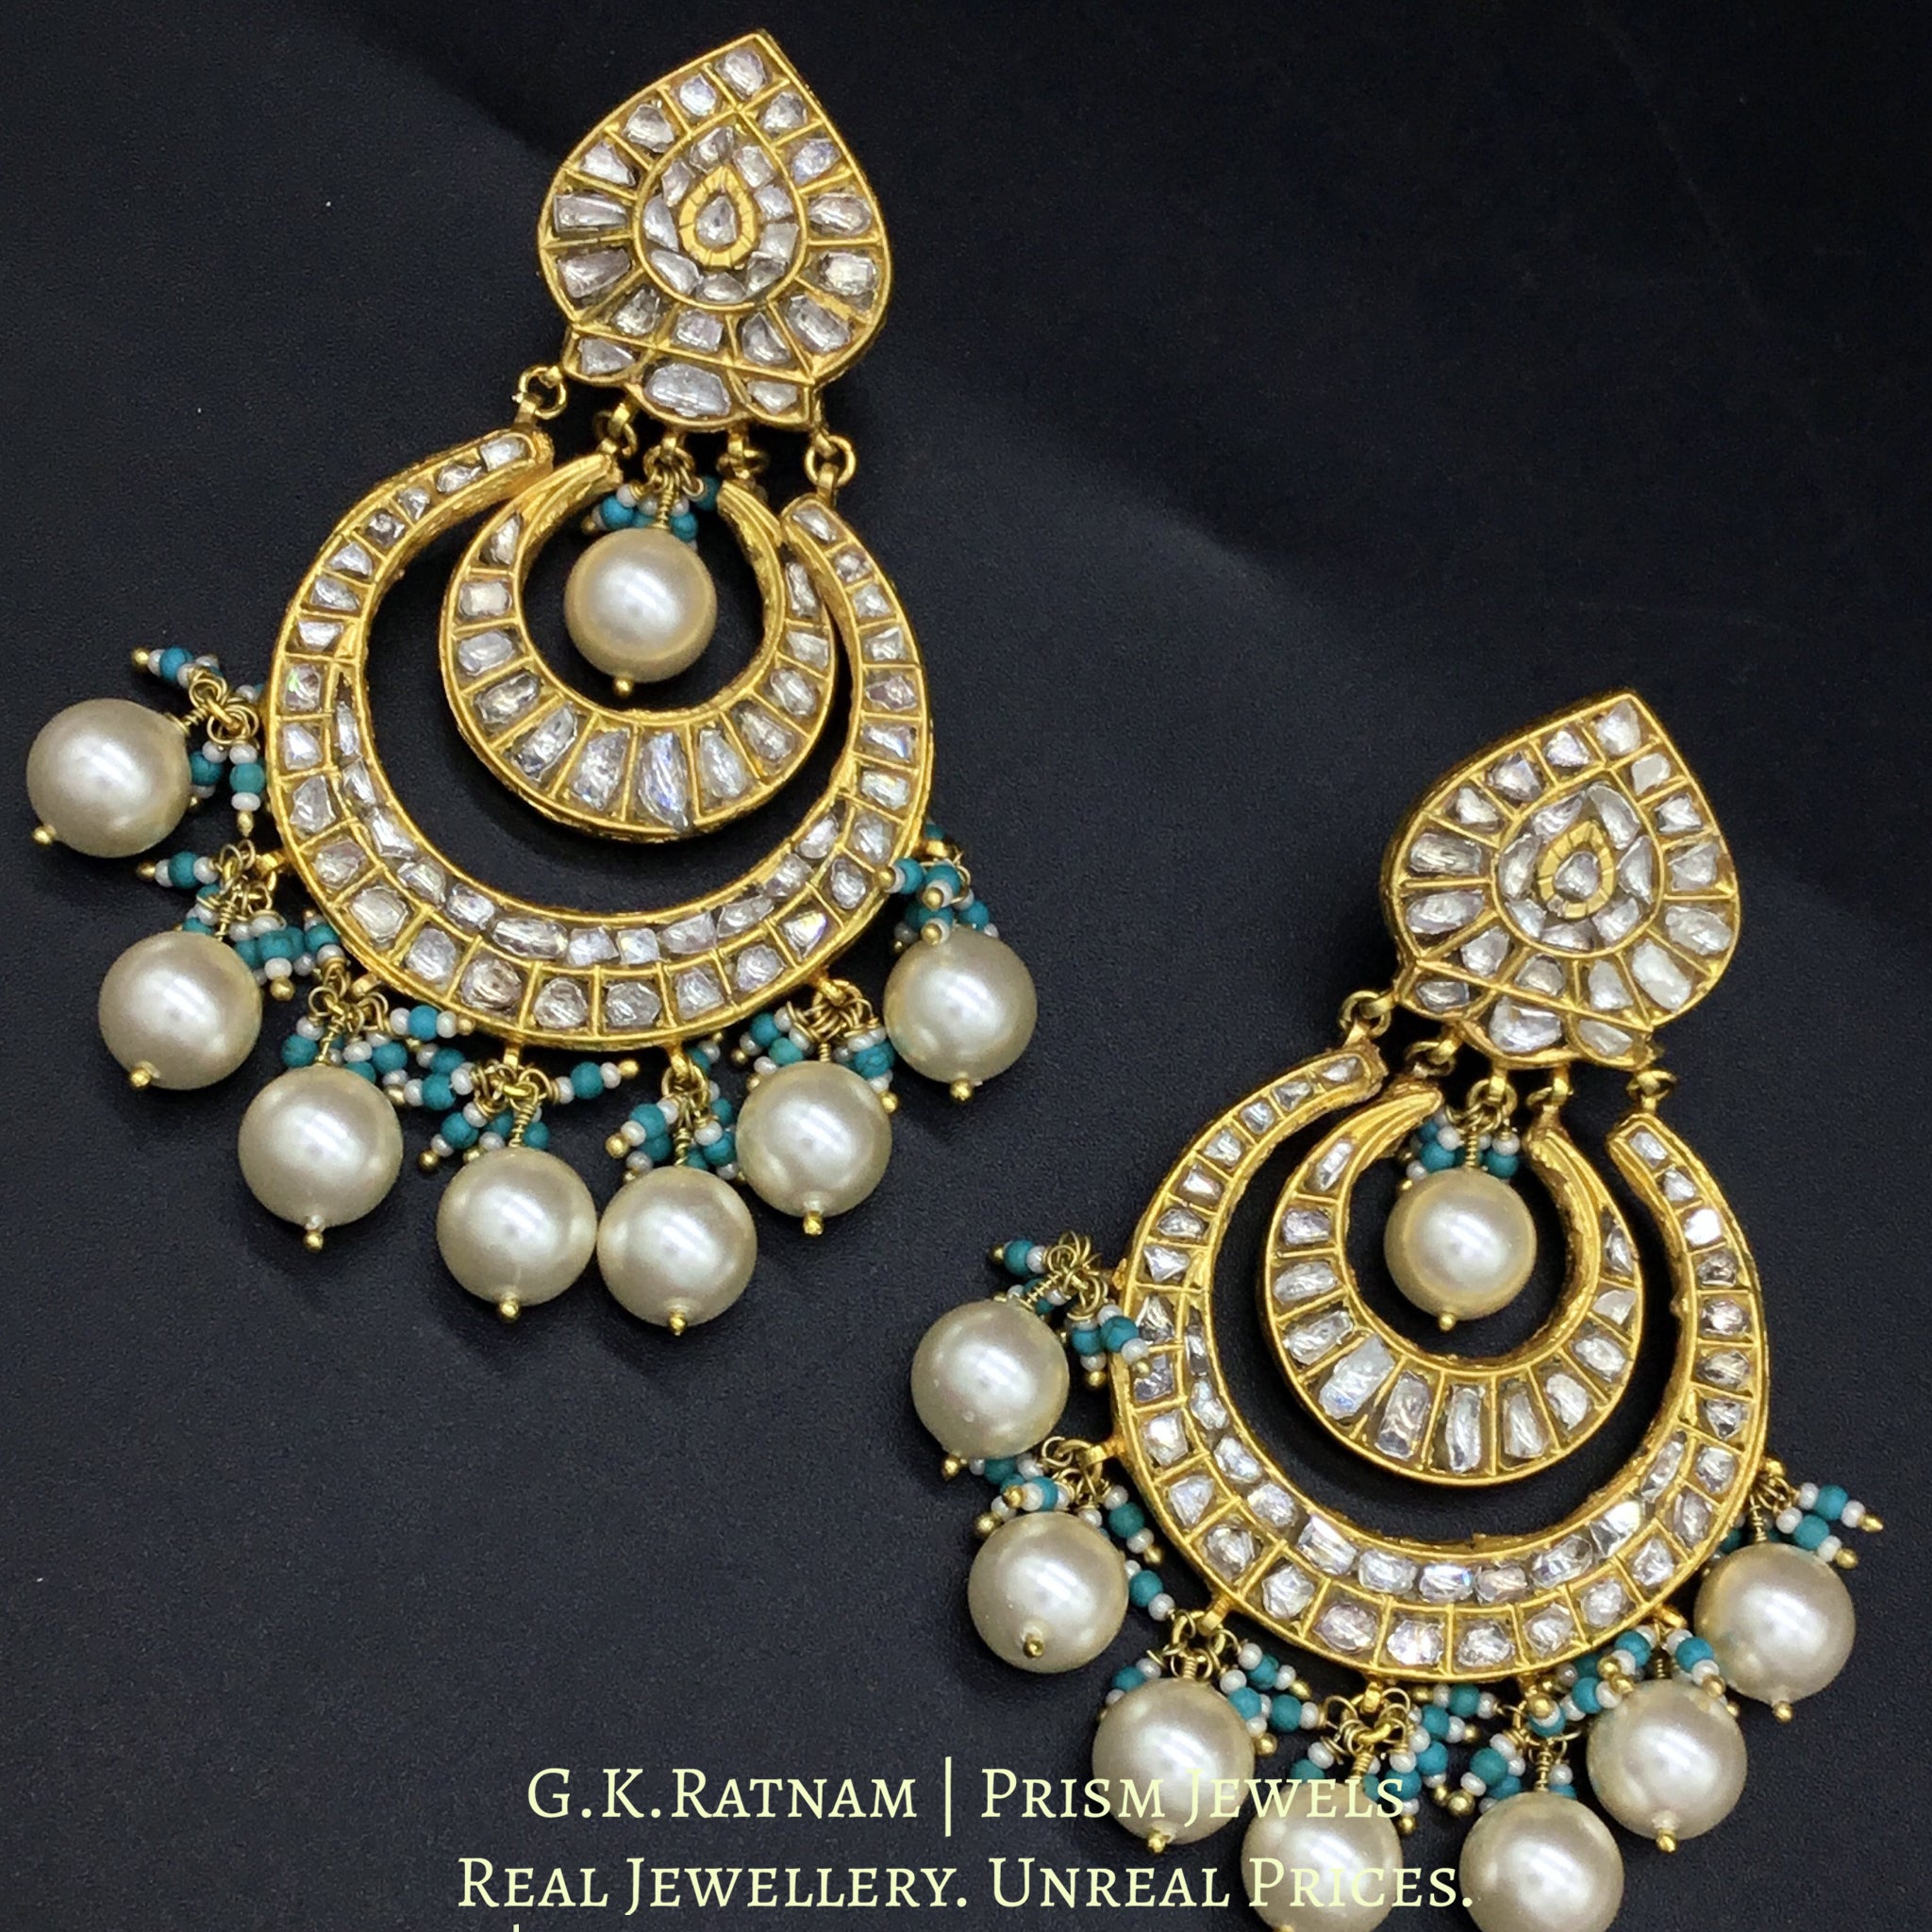 23k Gold and Diamond Polki Chand Bali Earring pair with multiple chands and firoza beads